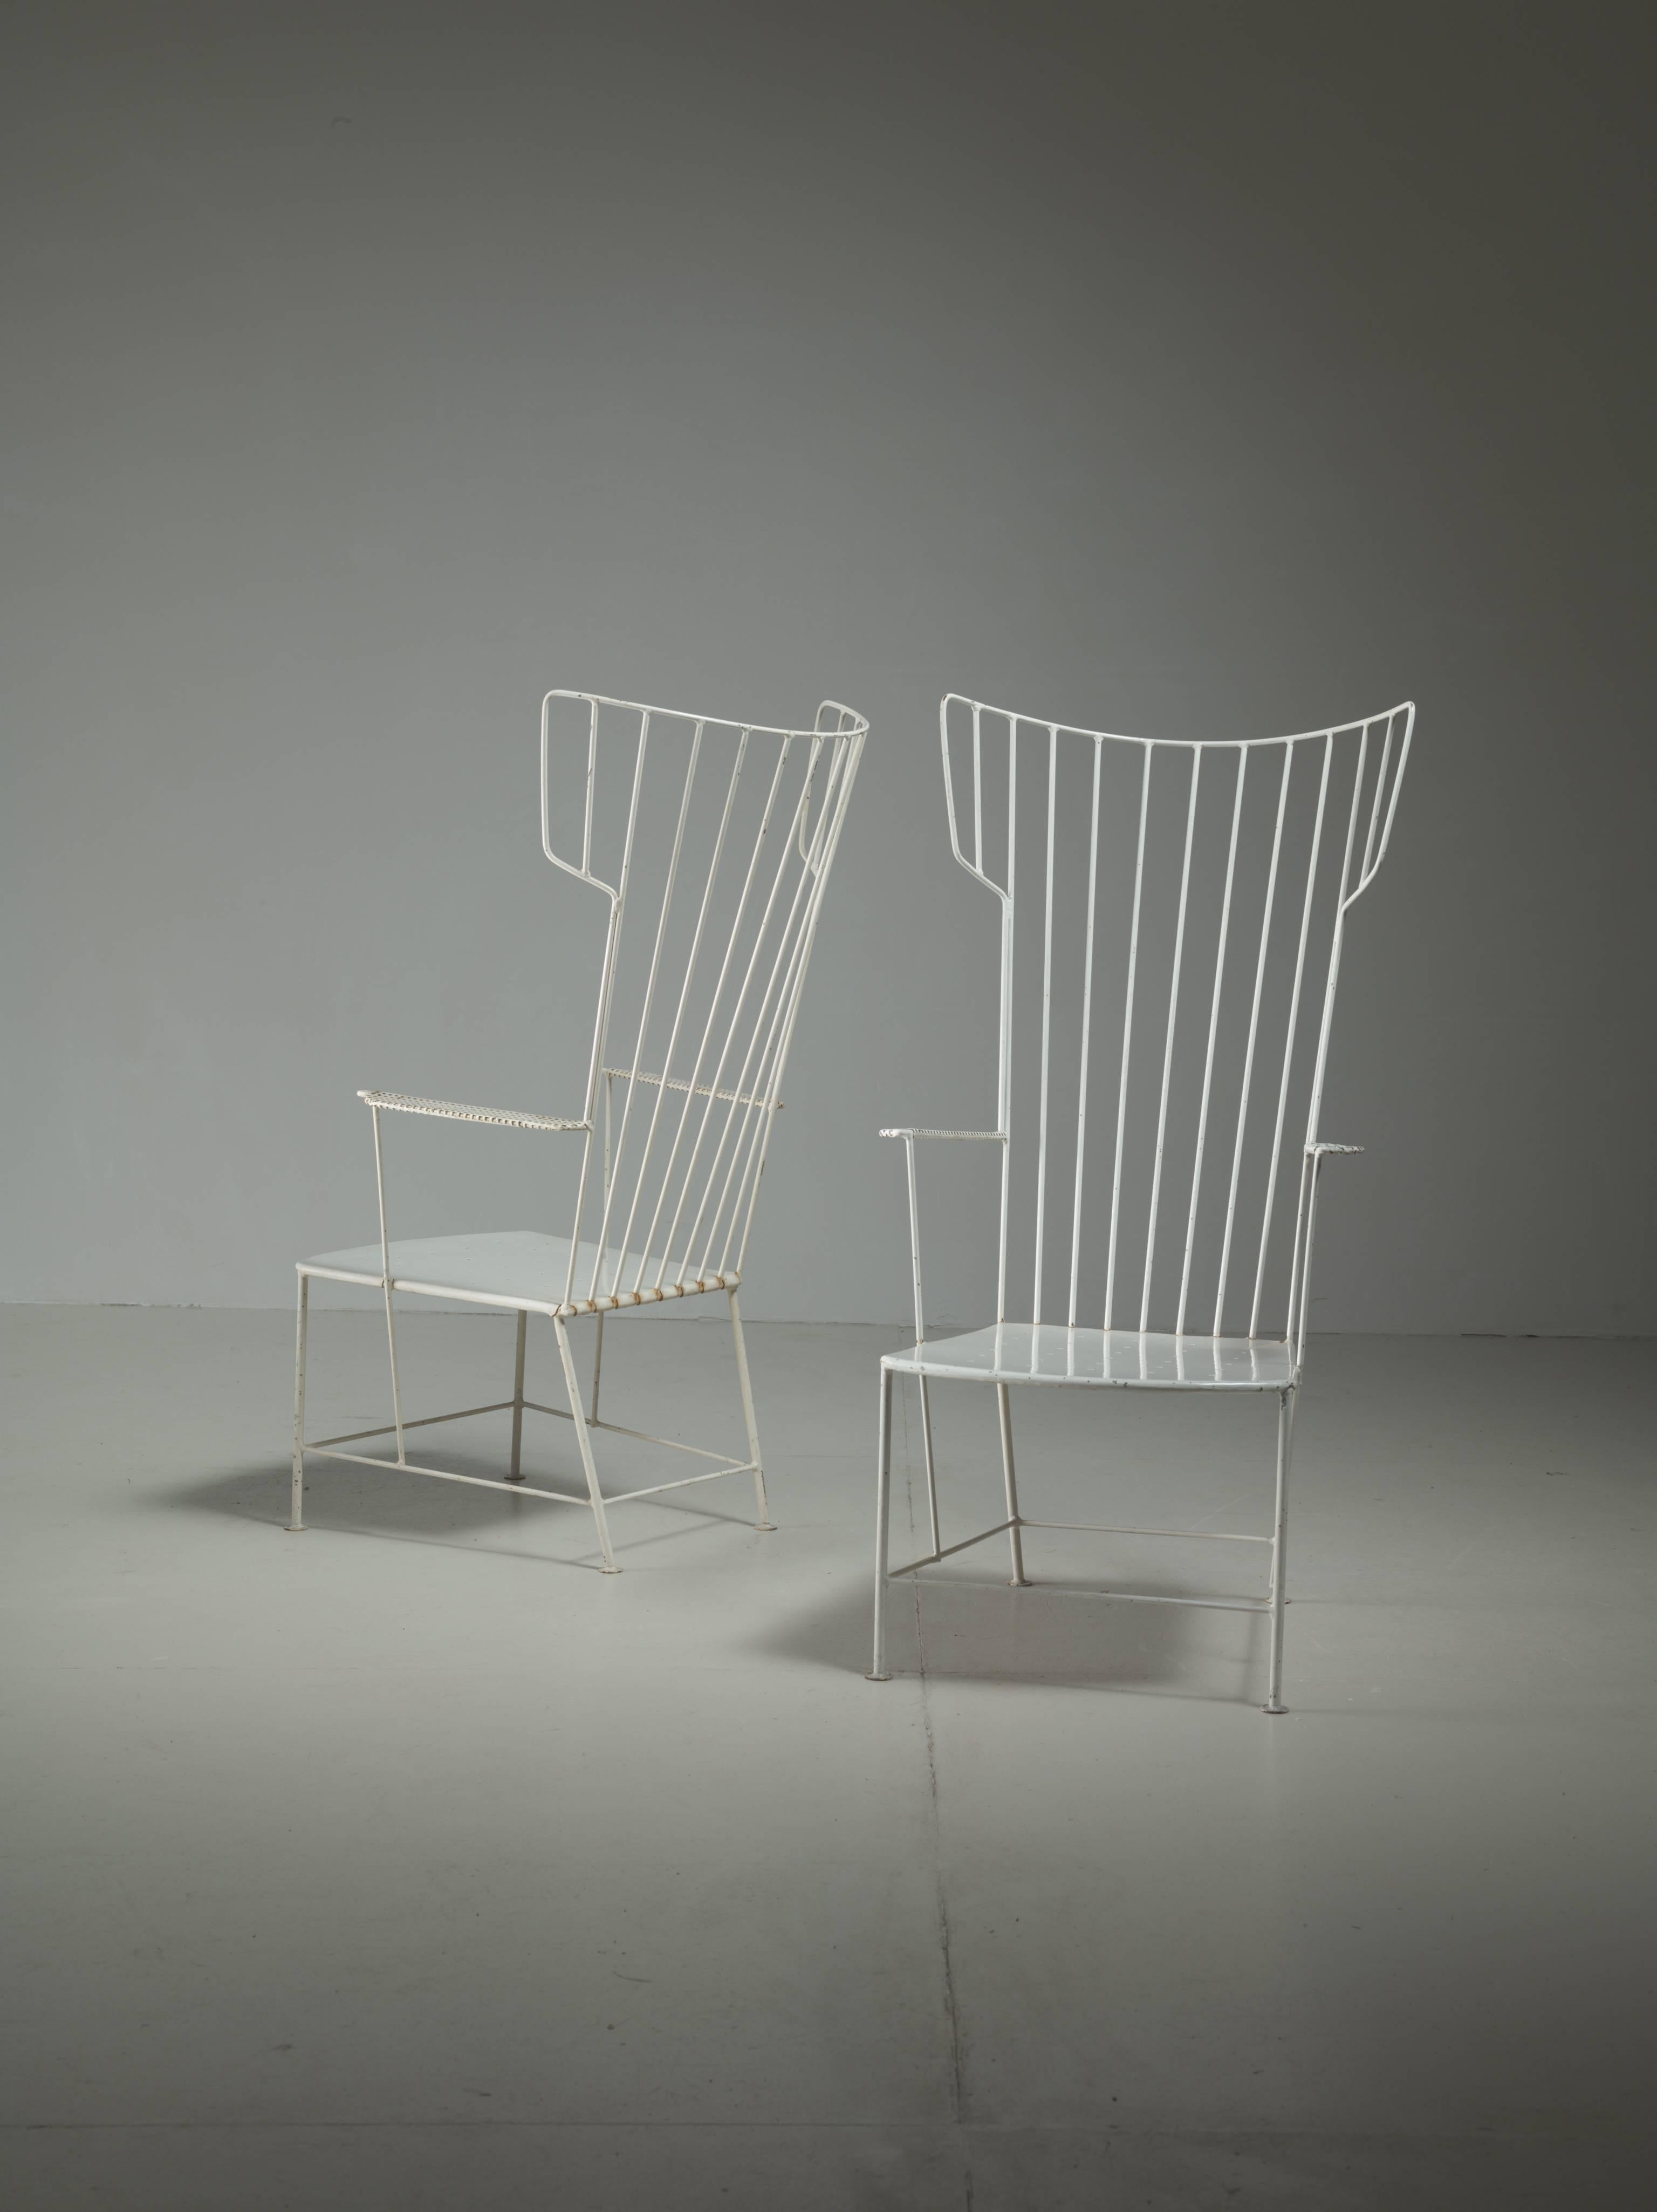 Lacquered Praun and Lauterbach Pair of White Metal Garden Chairs, Austria, 1950s For Sale